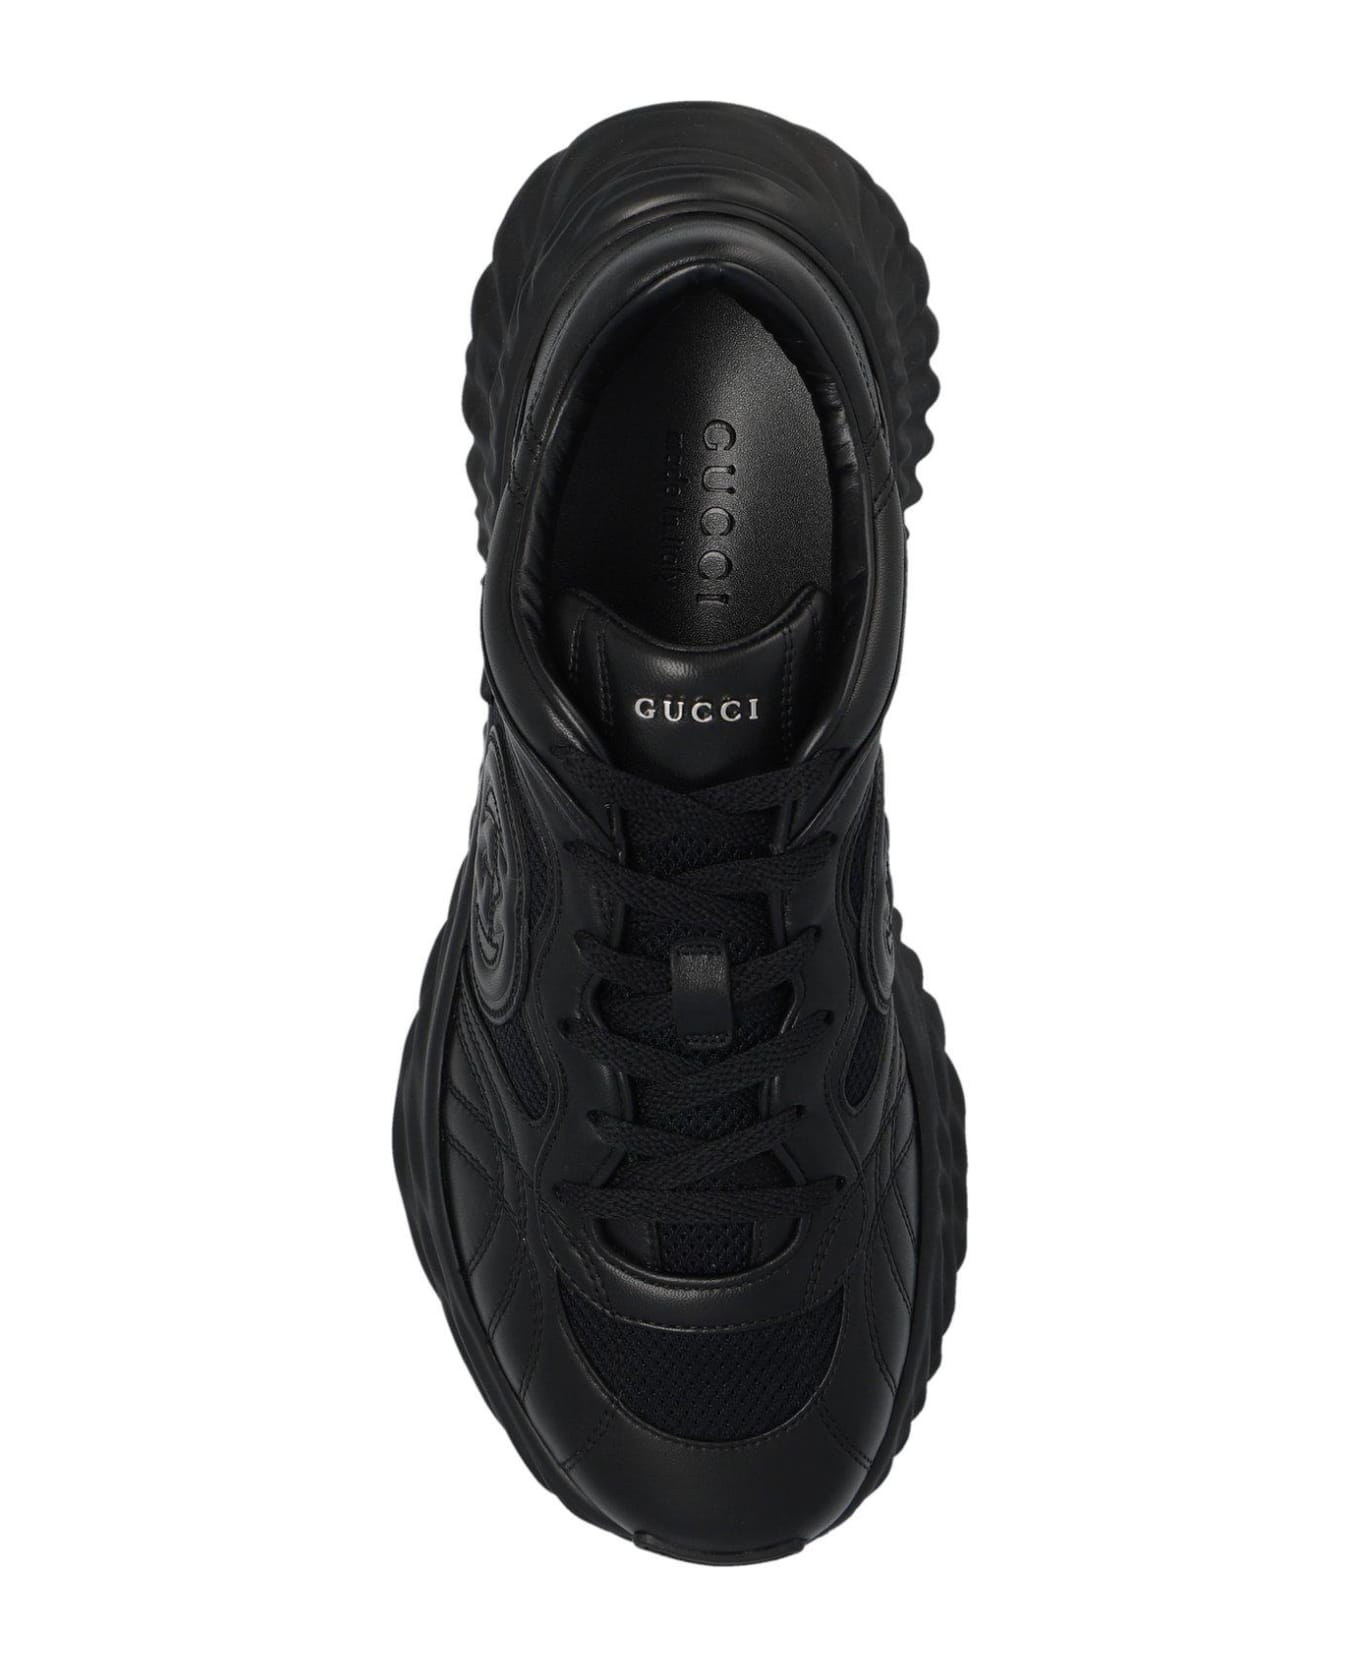 Gucci Gg Ripple Lace-up Sneakers - Black